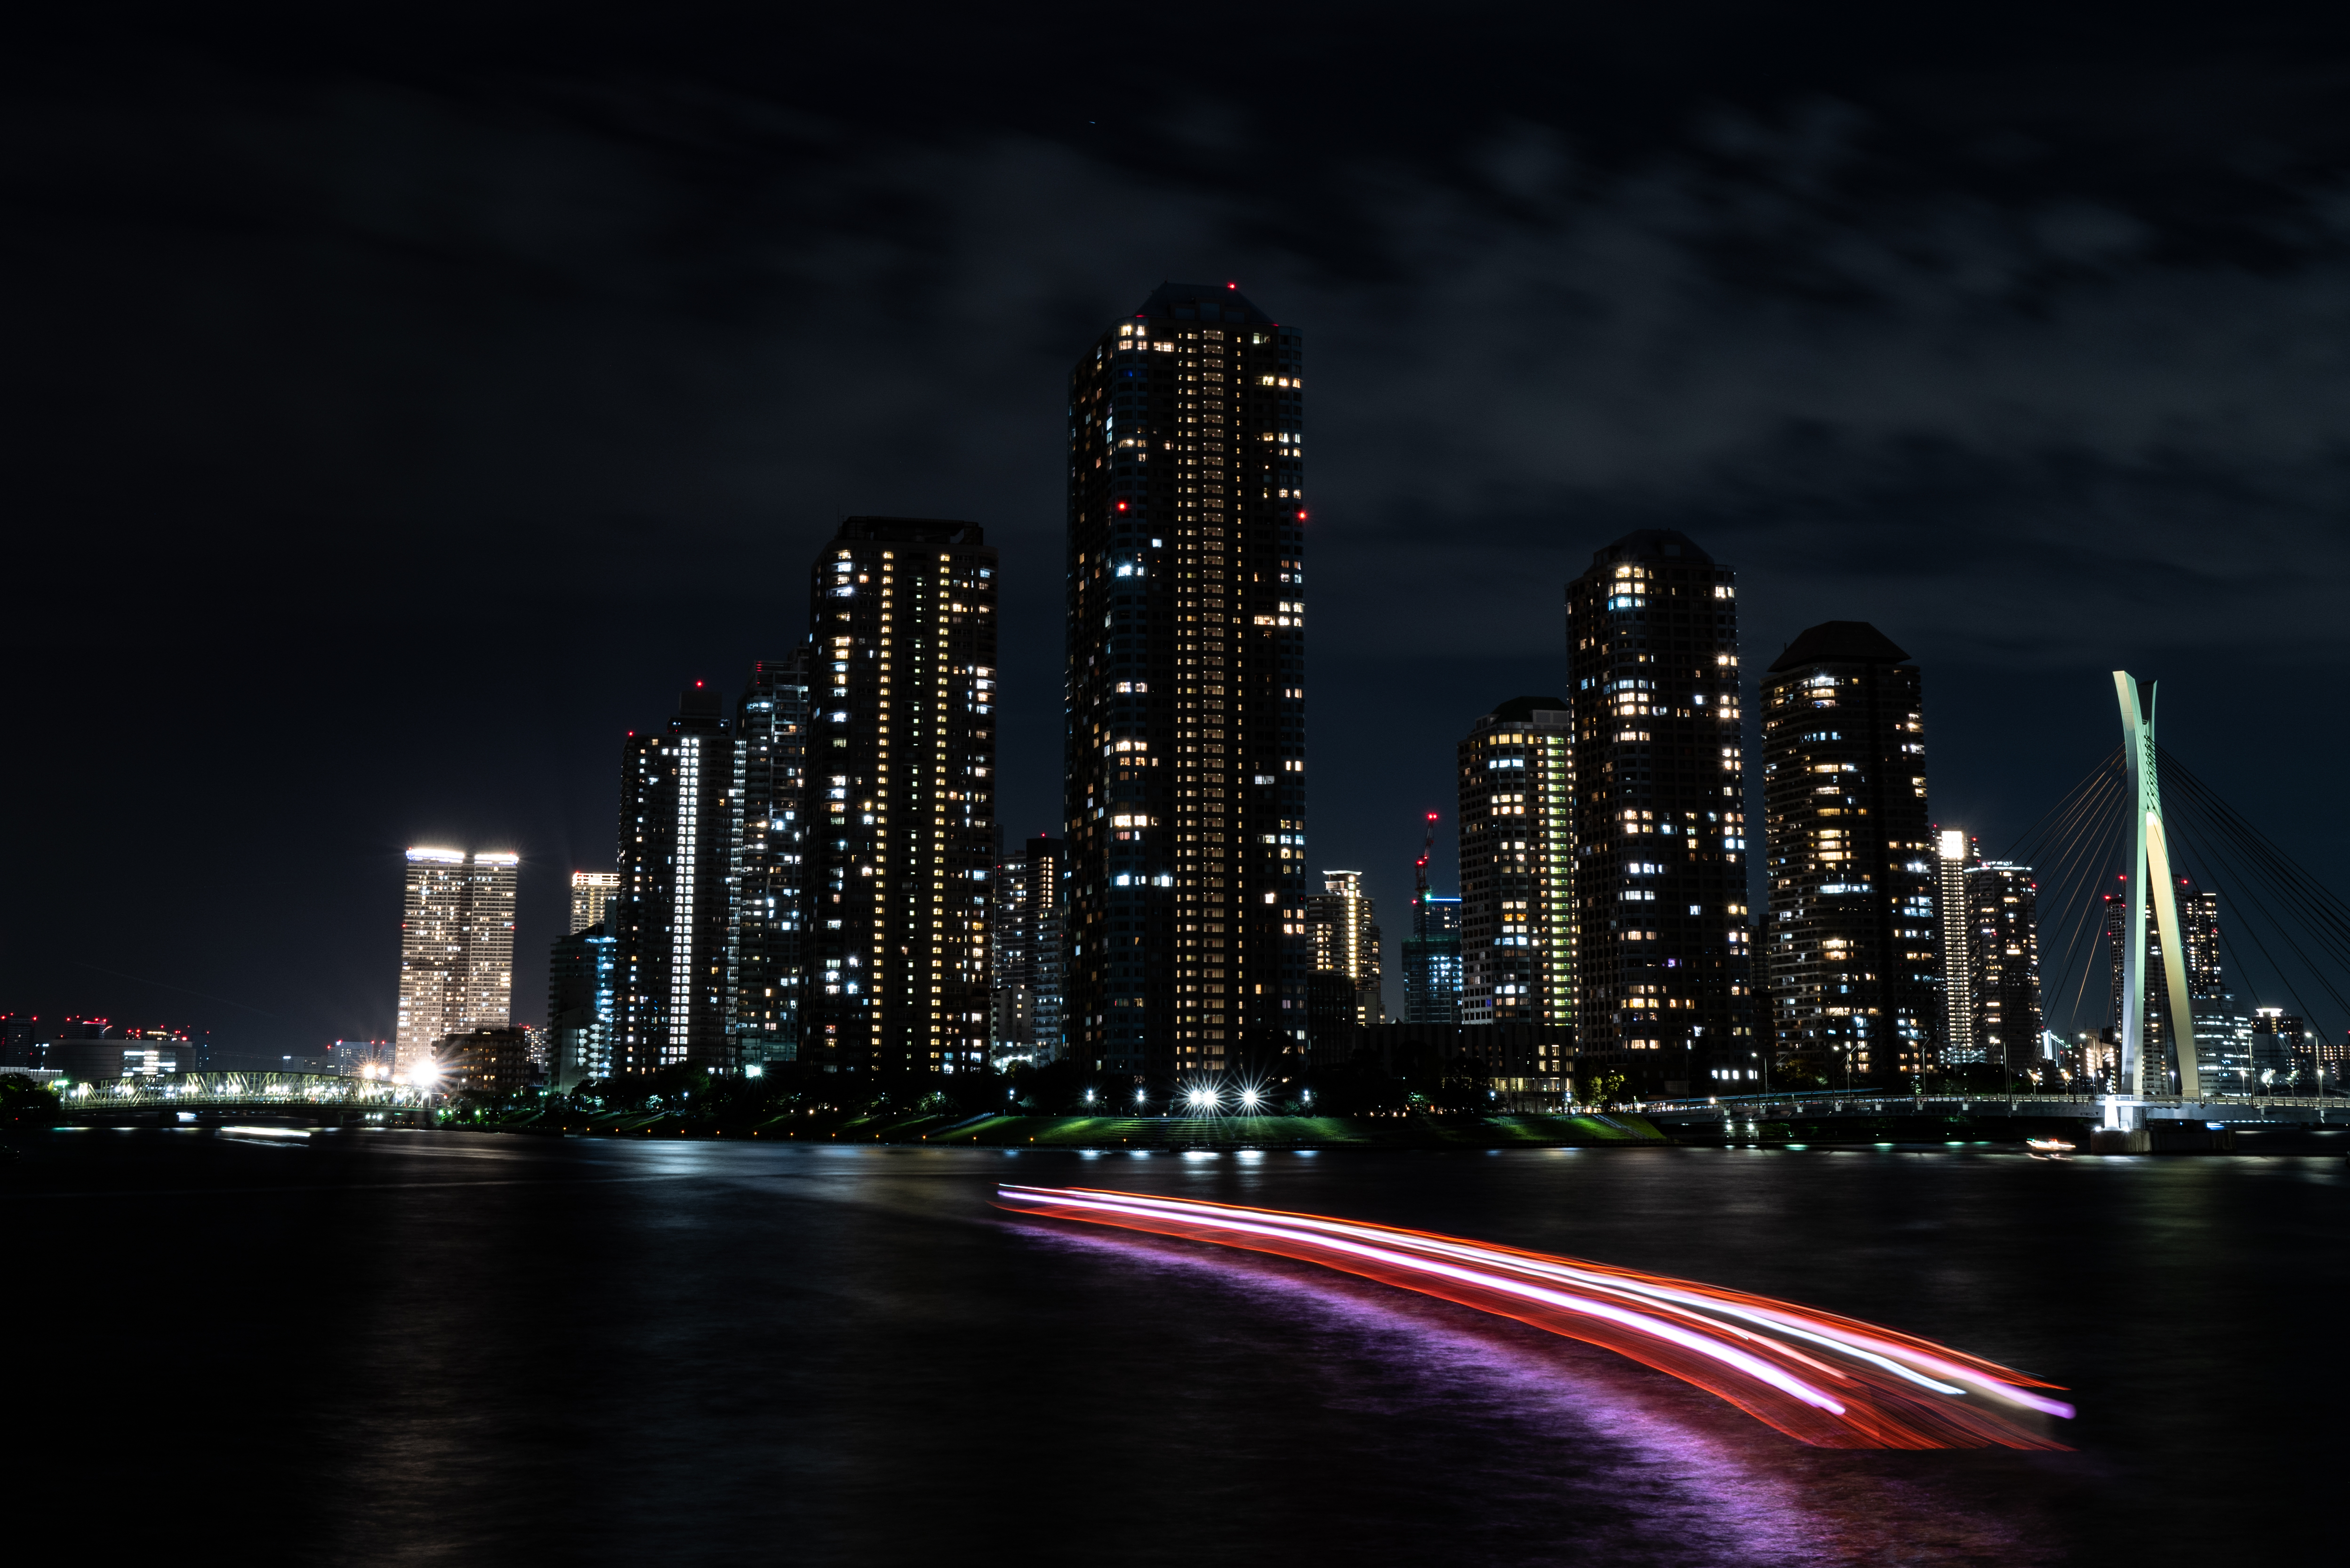 61747 download wallpaper architecture, building, lights, dark, coast, night city screensavers and pictures for free